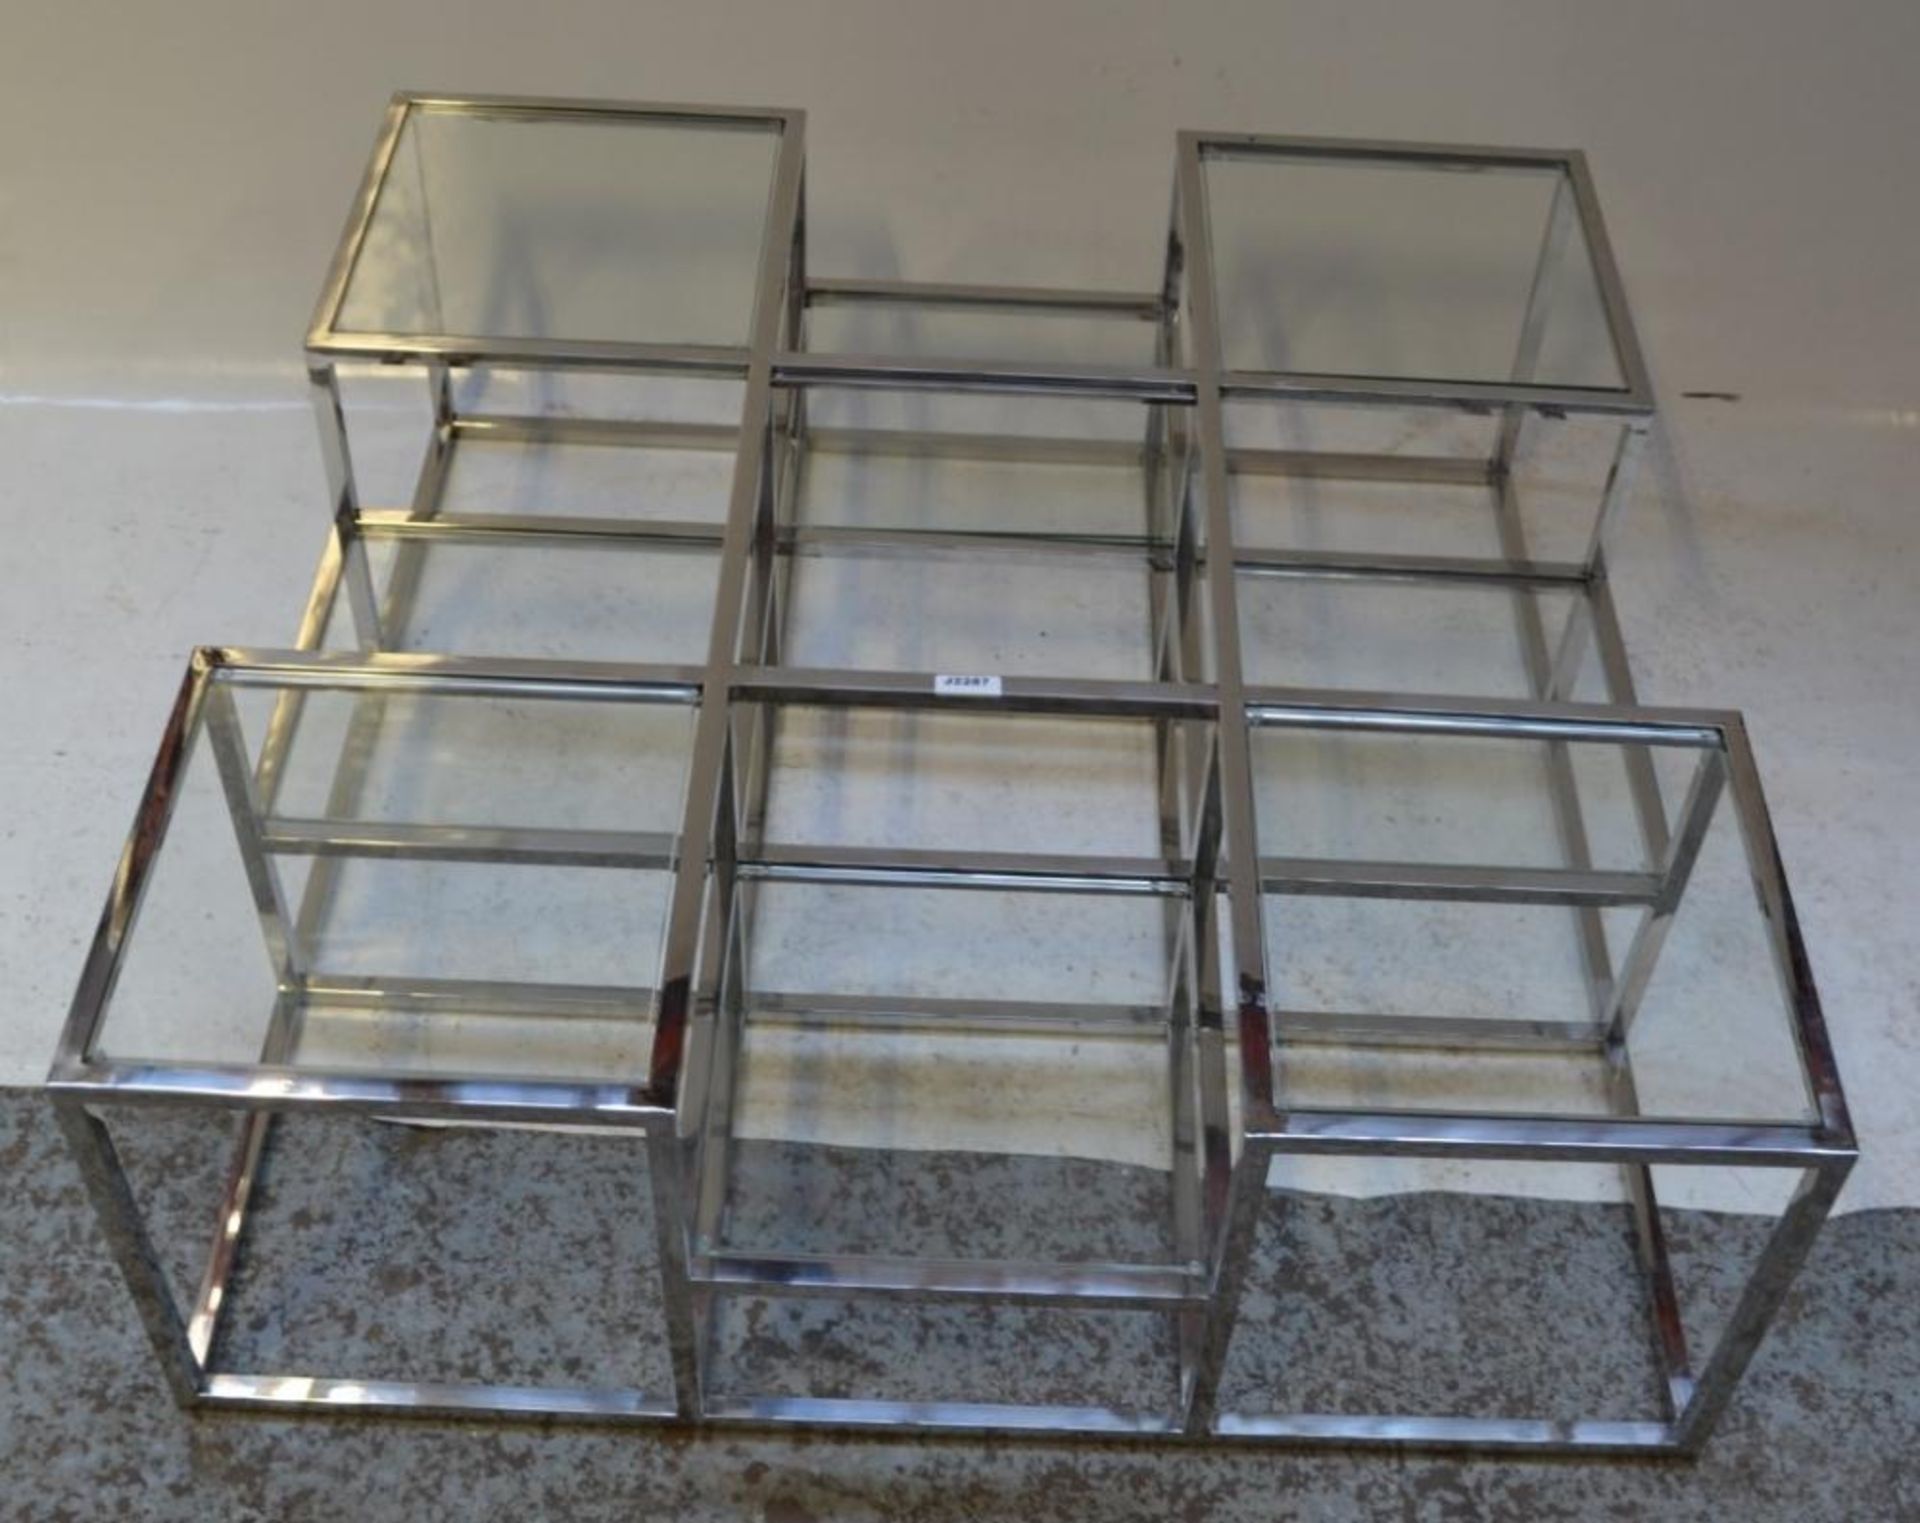 1 x METAL AND GLASS MULTI COFFEE TABLE - CL364 - Ref:WH- J2288 - Location: Altrincham WA1 - Image 2 of 4